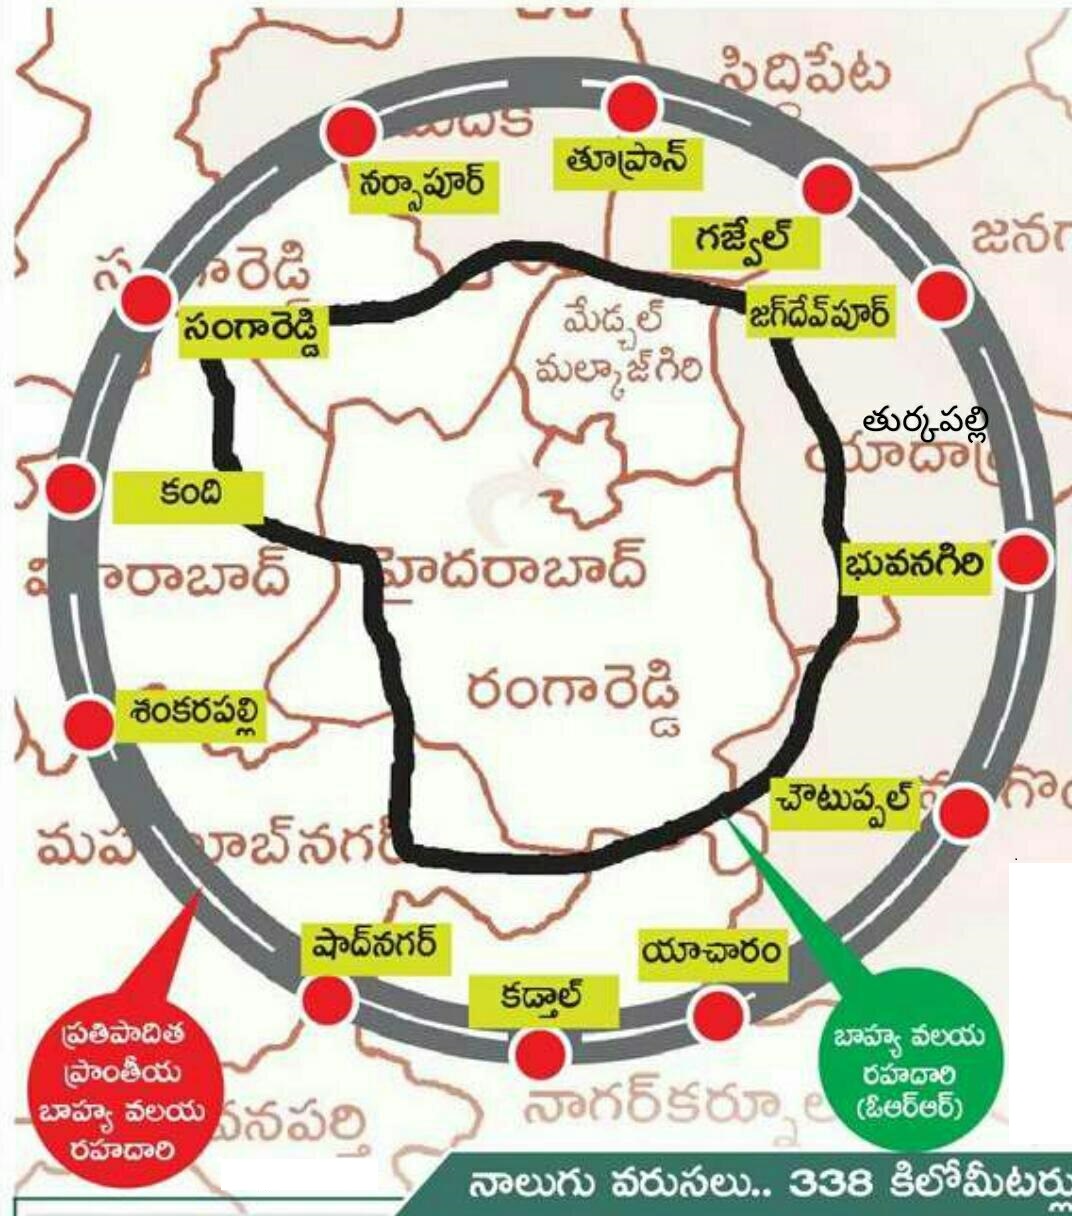 Hyderabad Metro Phase 2 - Key Facts, Route Map, Stations, And Other Details